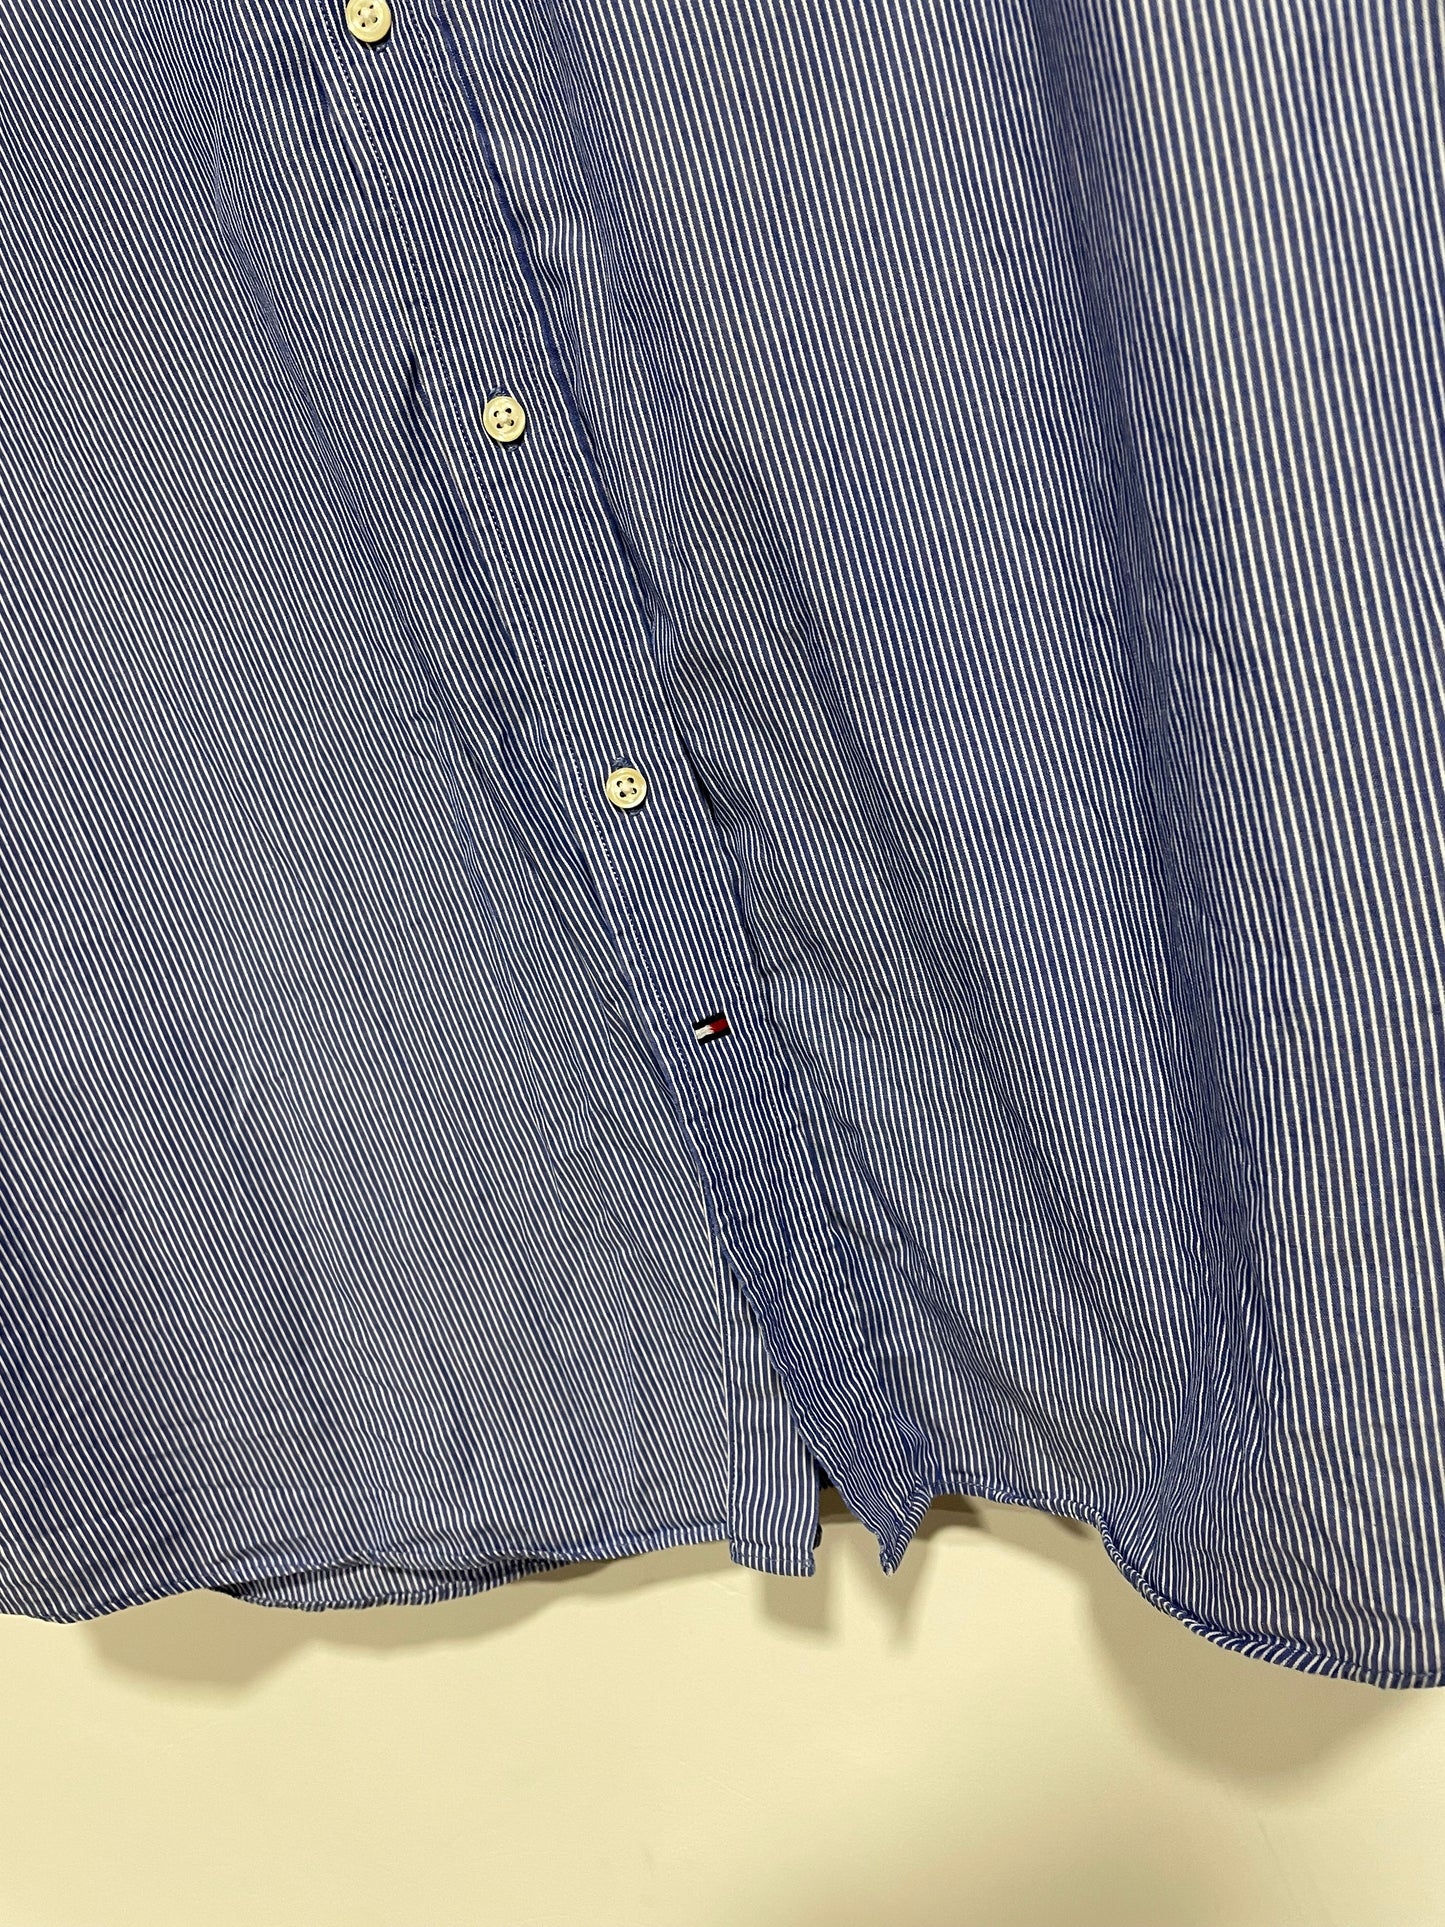 Camicia Tommy Hilfiger a righe (C696)